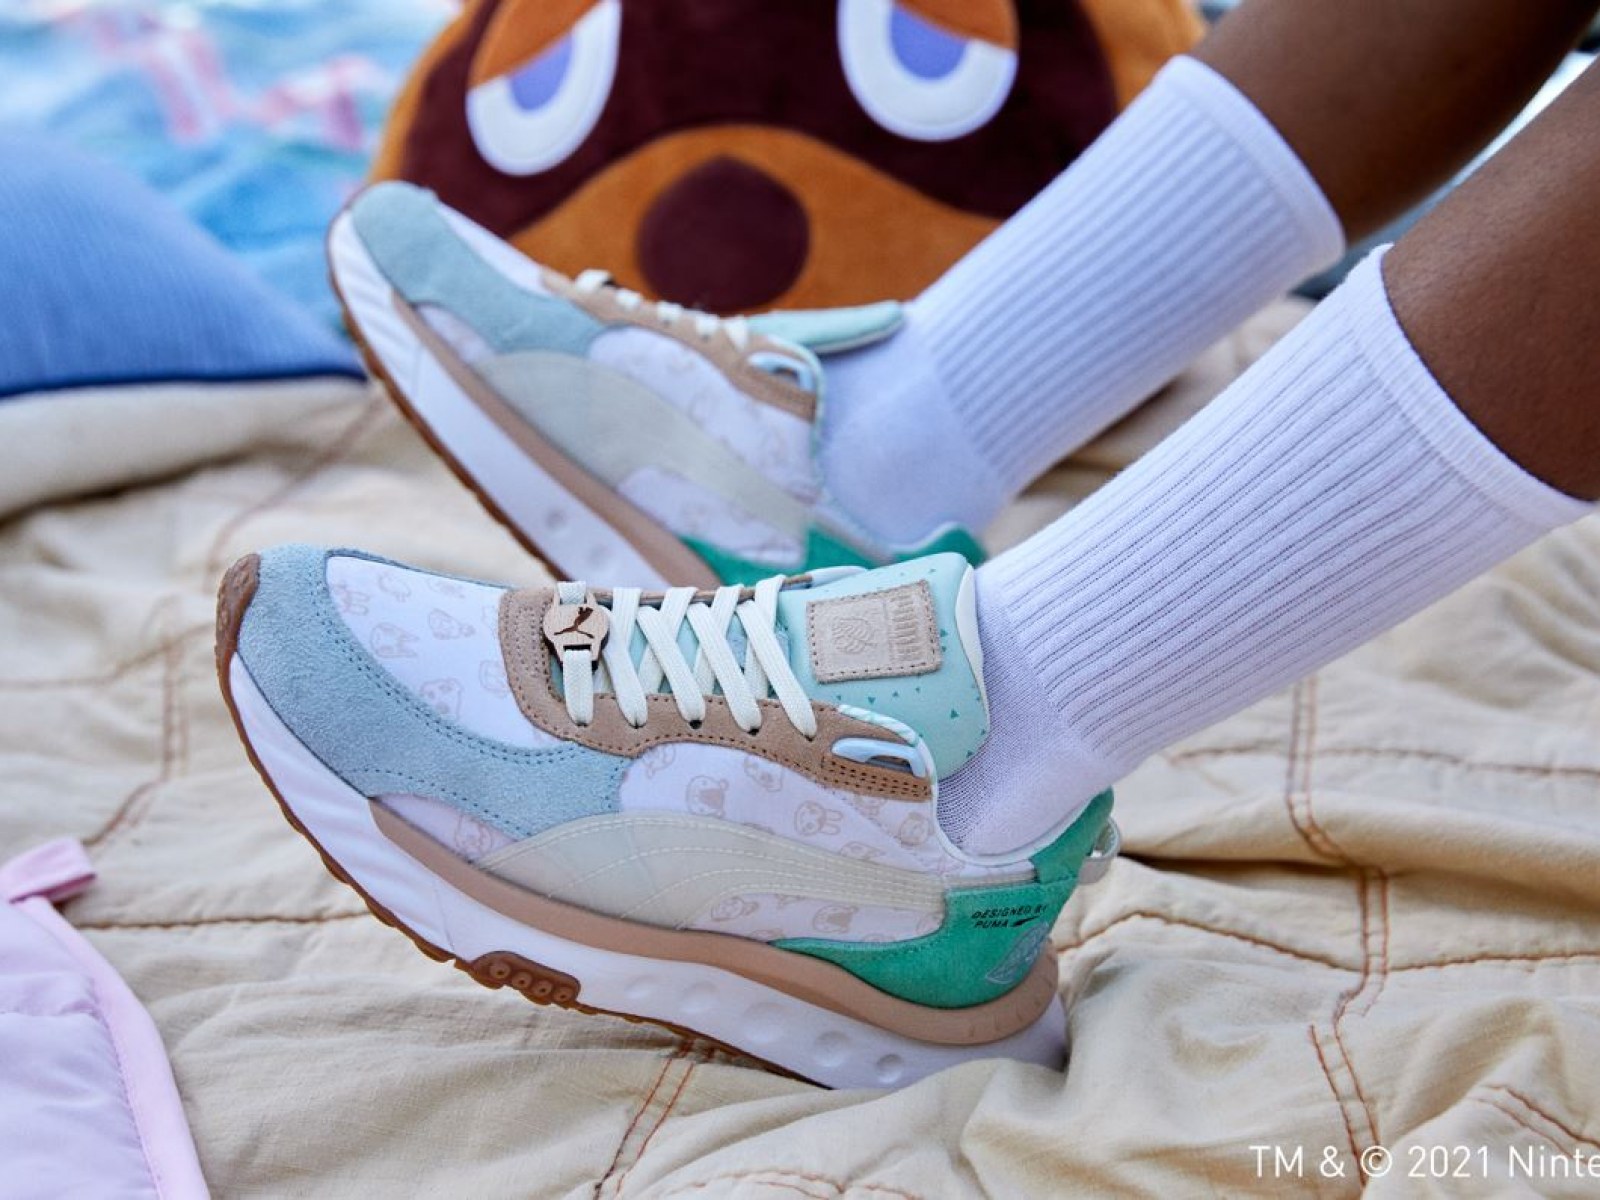 Animal Crossing' x Puma Collab: Release Date and Designs Revealed